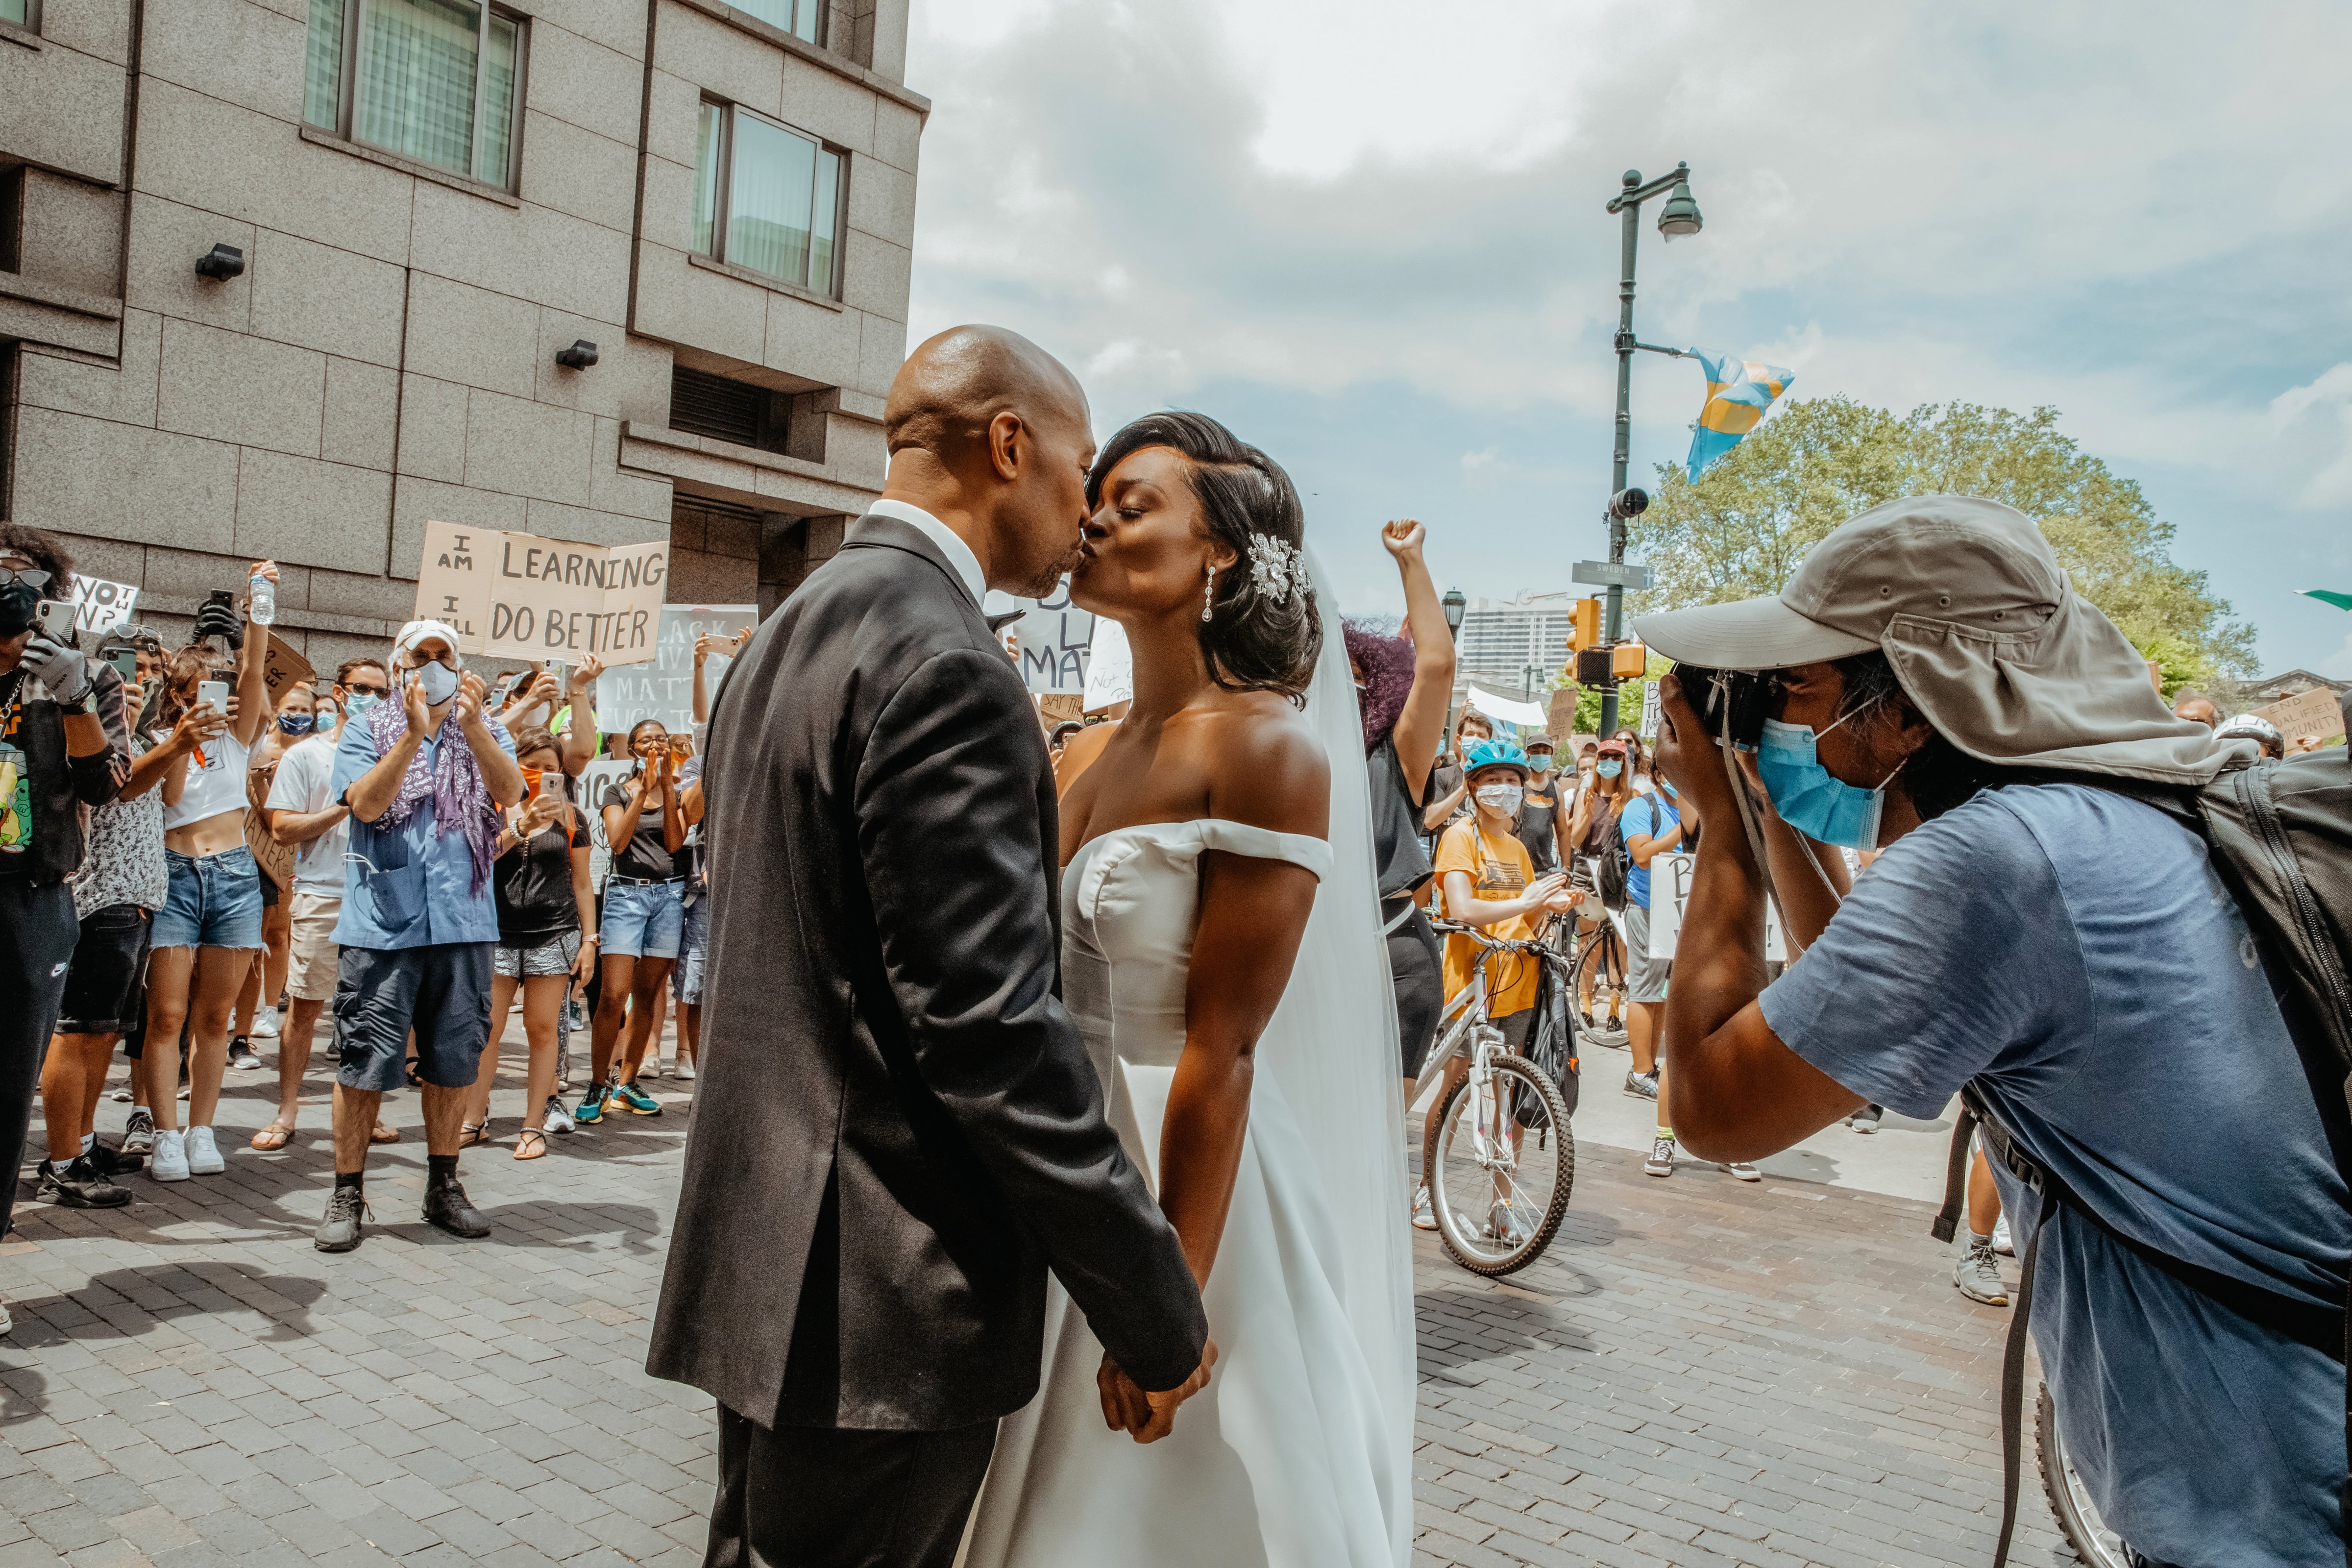 Dr. Kerry Anne Perkins and Michael Gordon join a Black Lives Matter protest taking place alongside their wedding ceremony at The Logan hotel in Philadelphia on June 6, 2020. (Linda McQueen—Linda McQueen Photography)